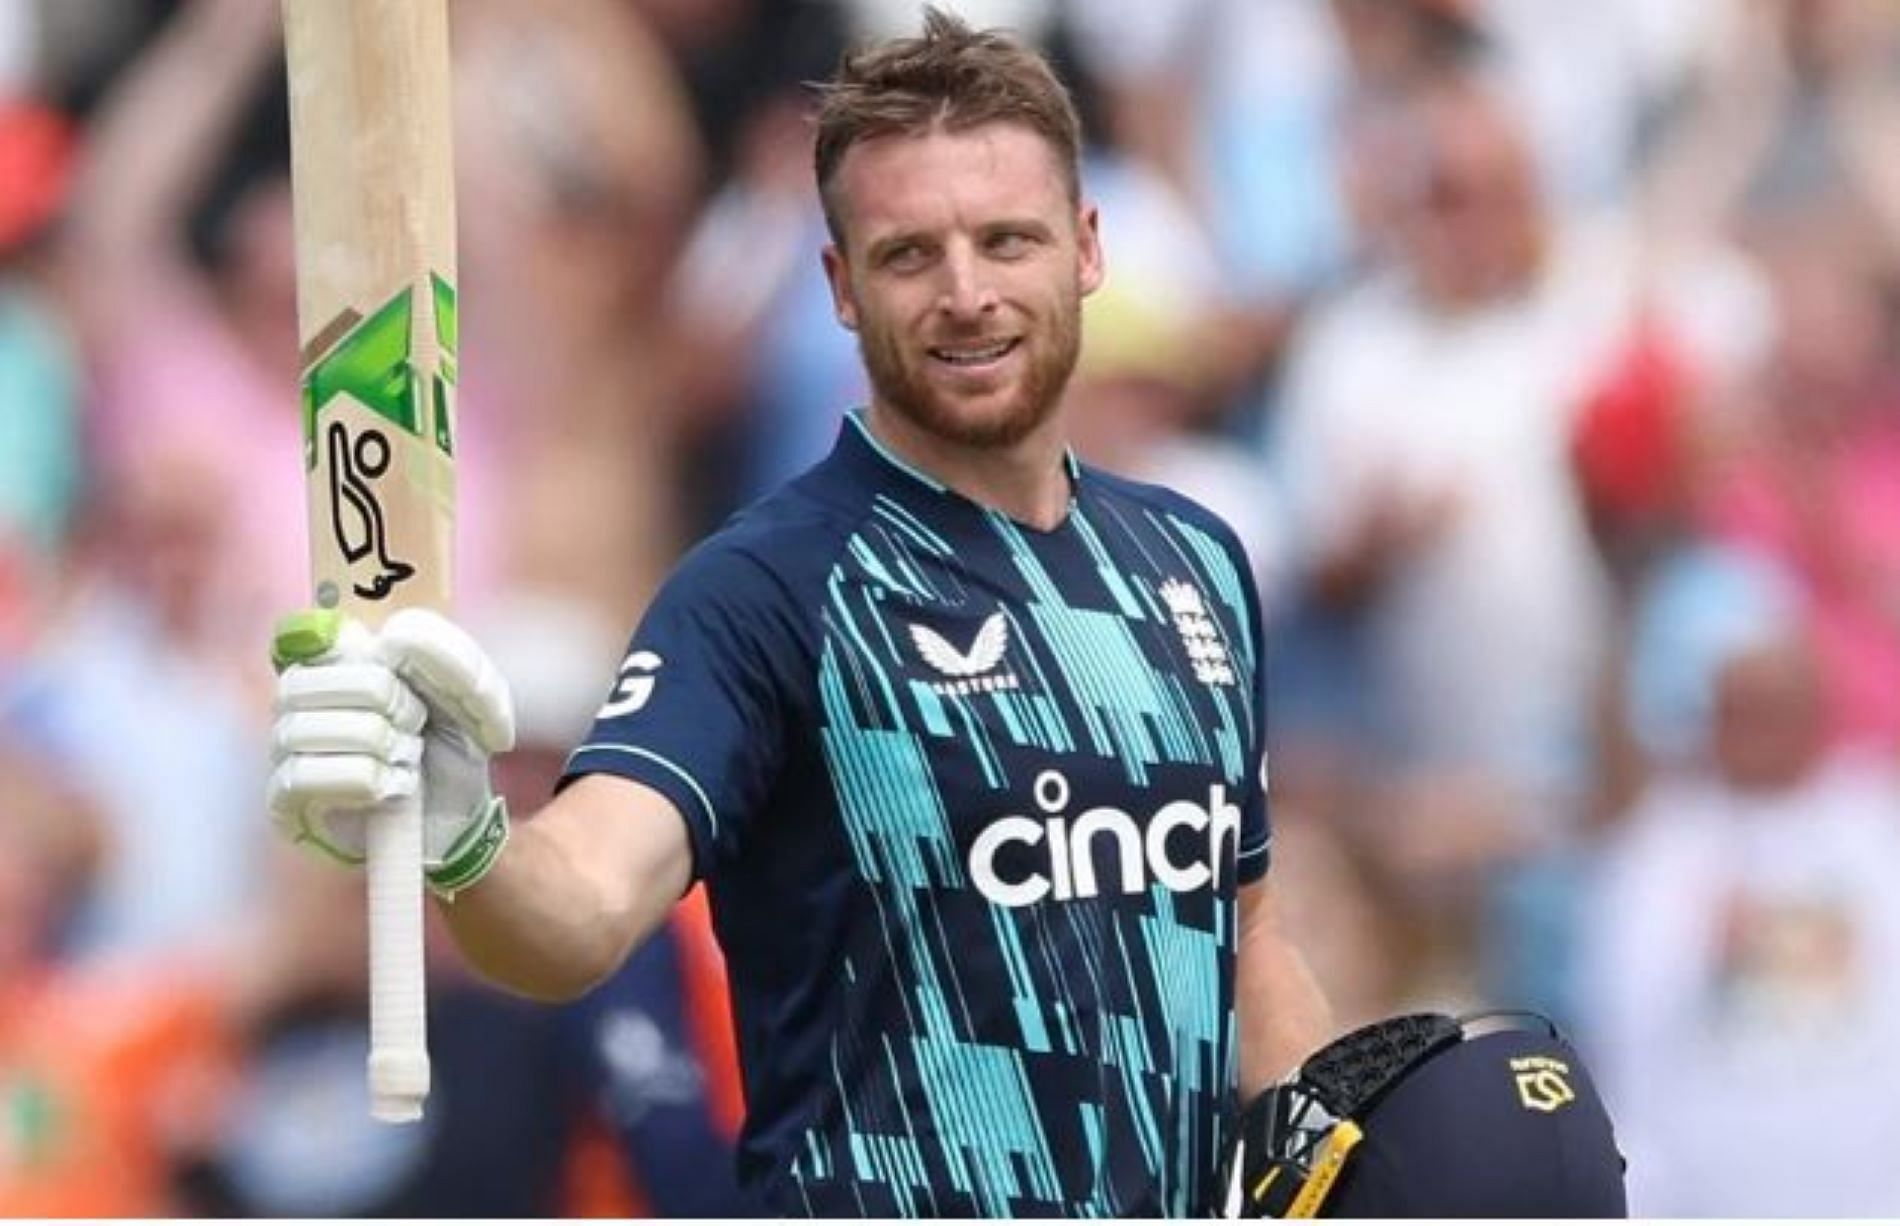 Jos Buttler will captain England as they look to defend their World Cup title from 2019